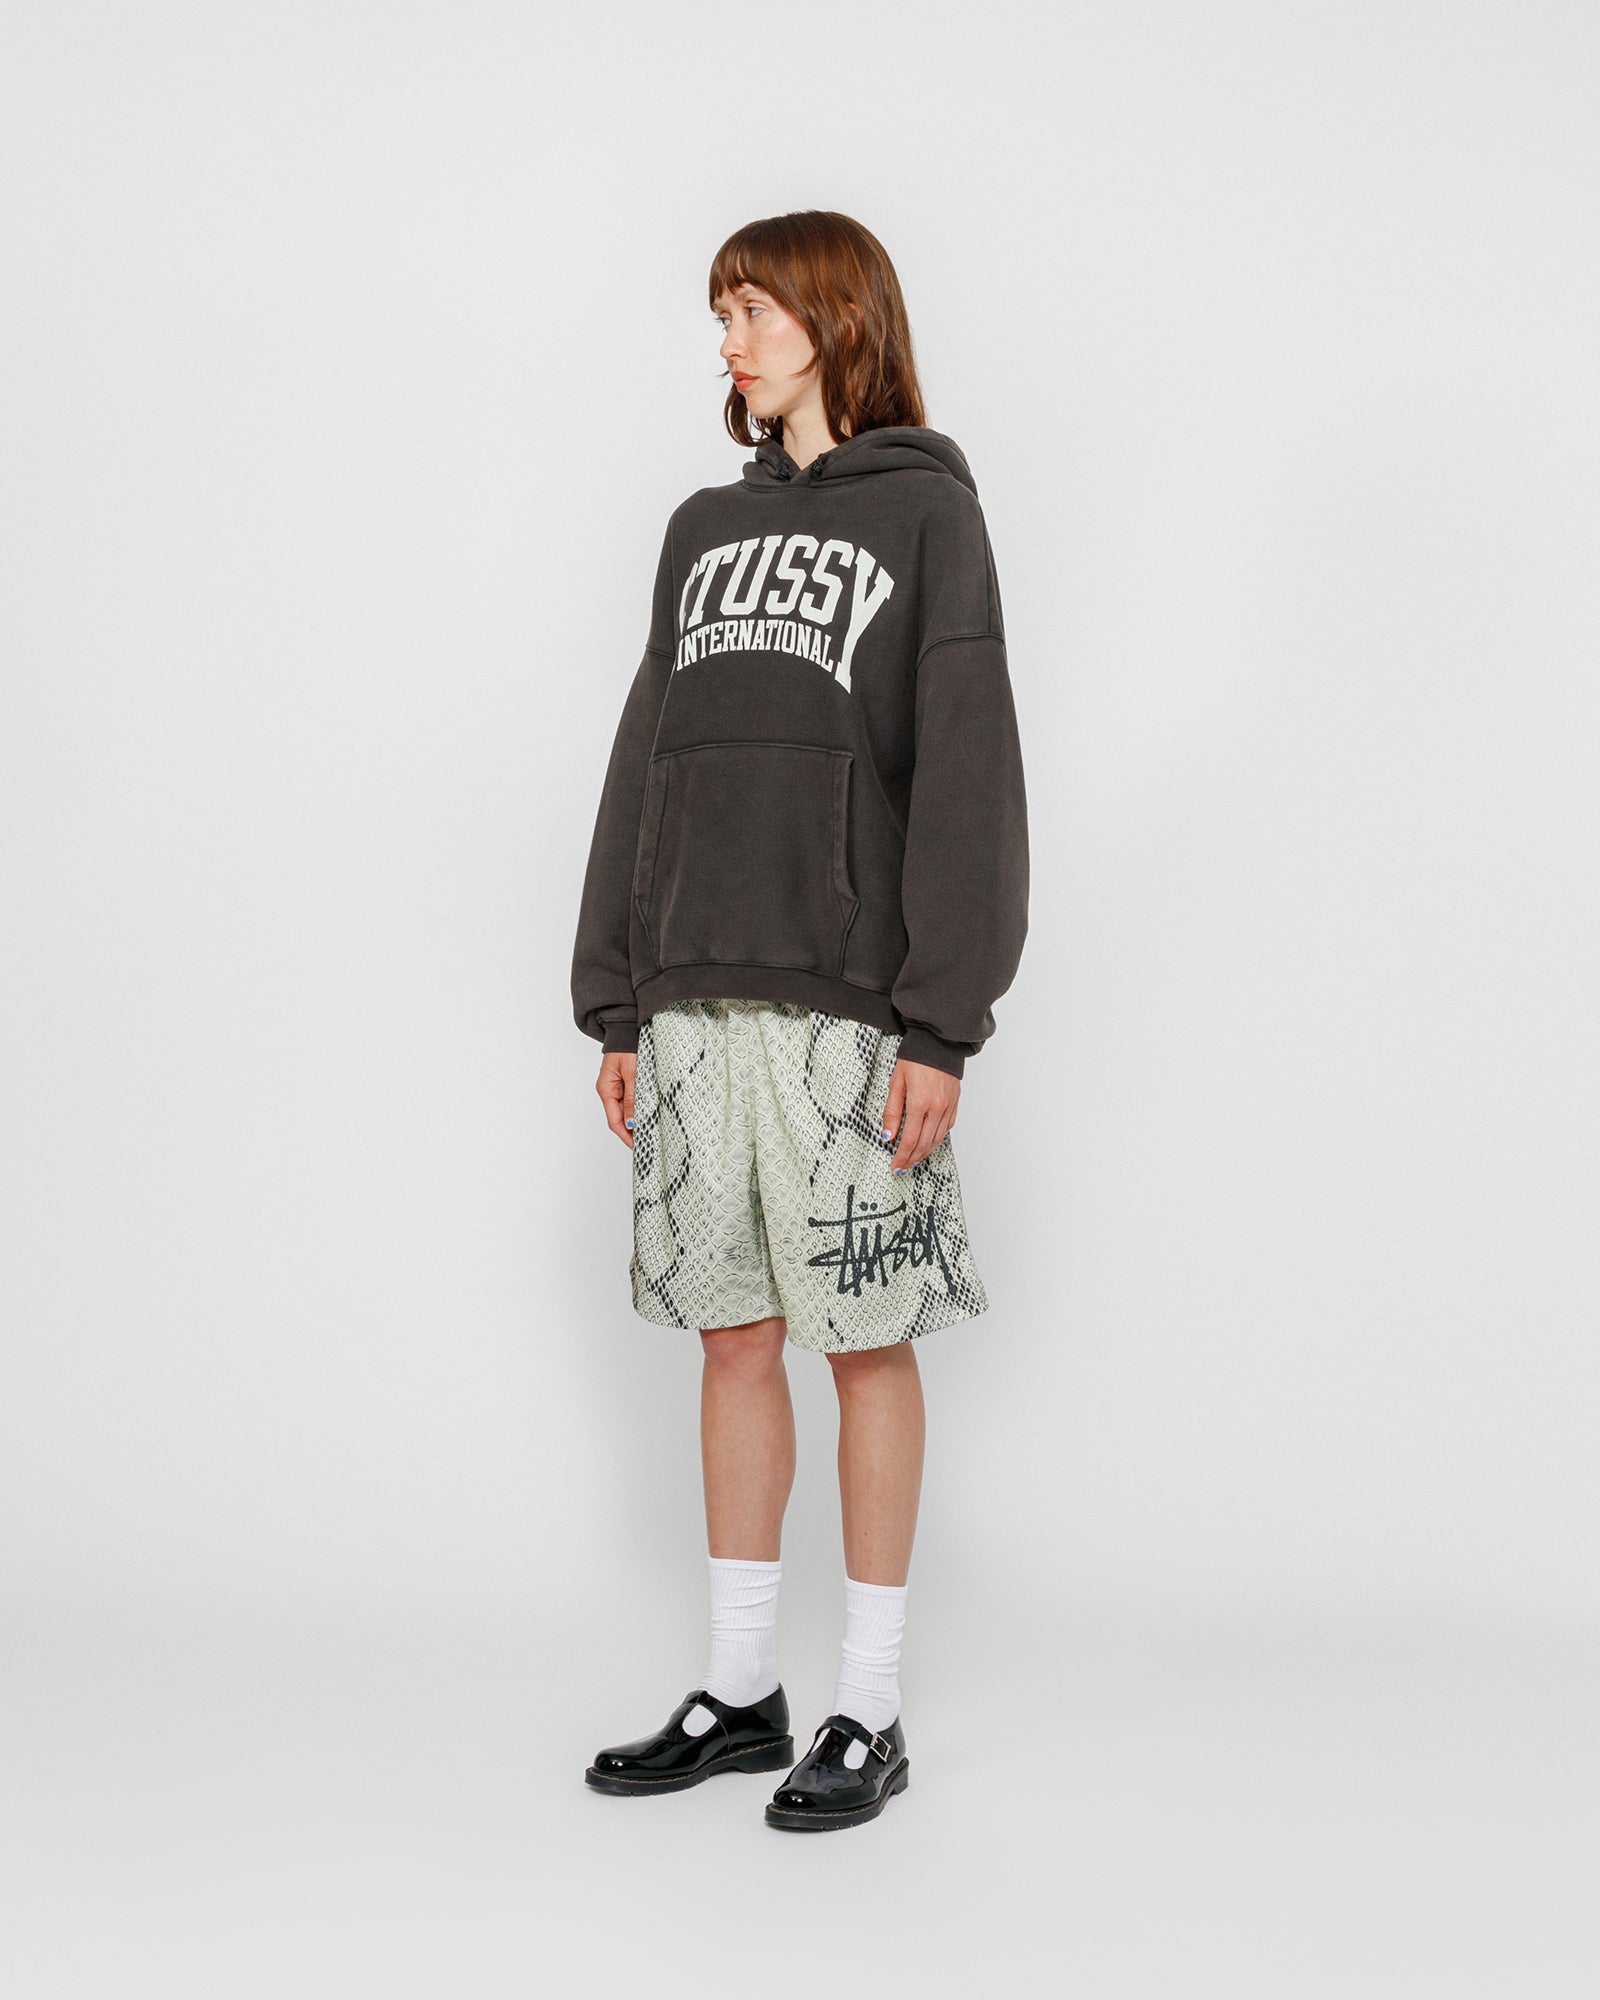 STÜSSY RELAXED HOODIE INTERNATIONAL WASHED BLACK SWEATS